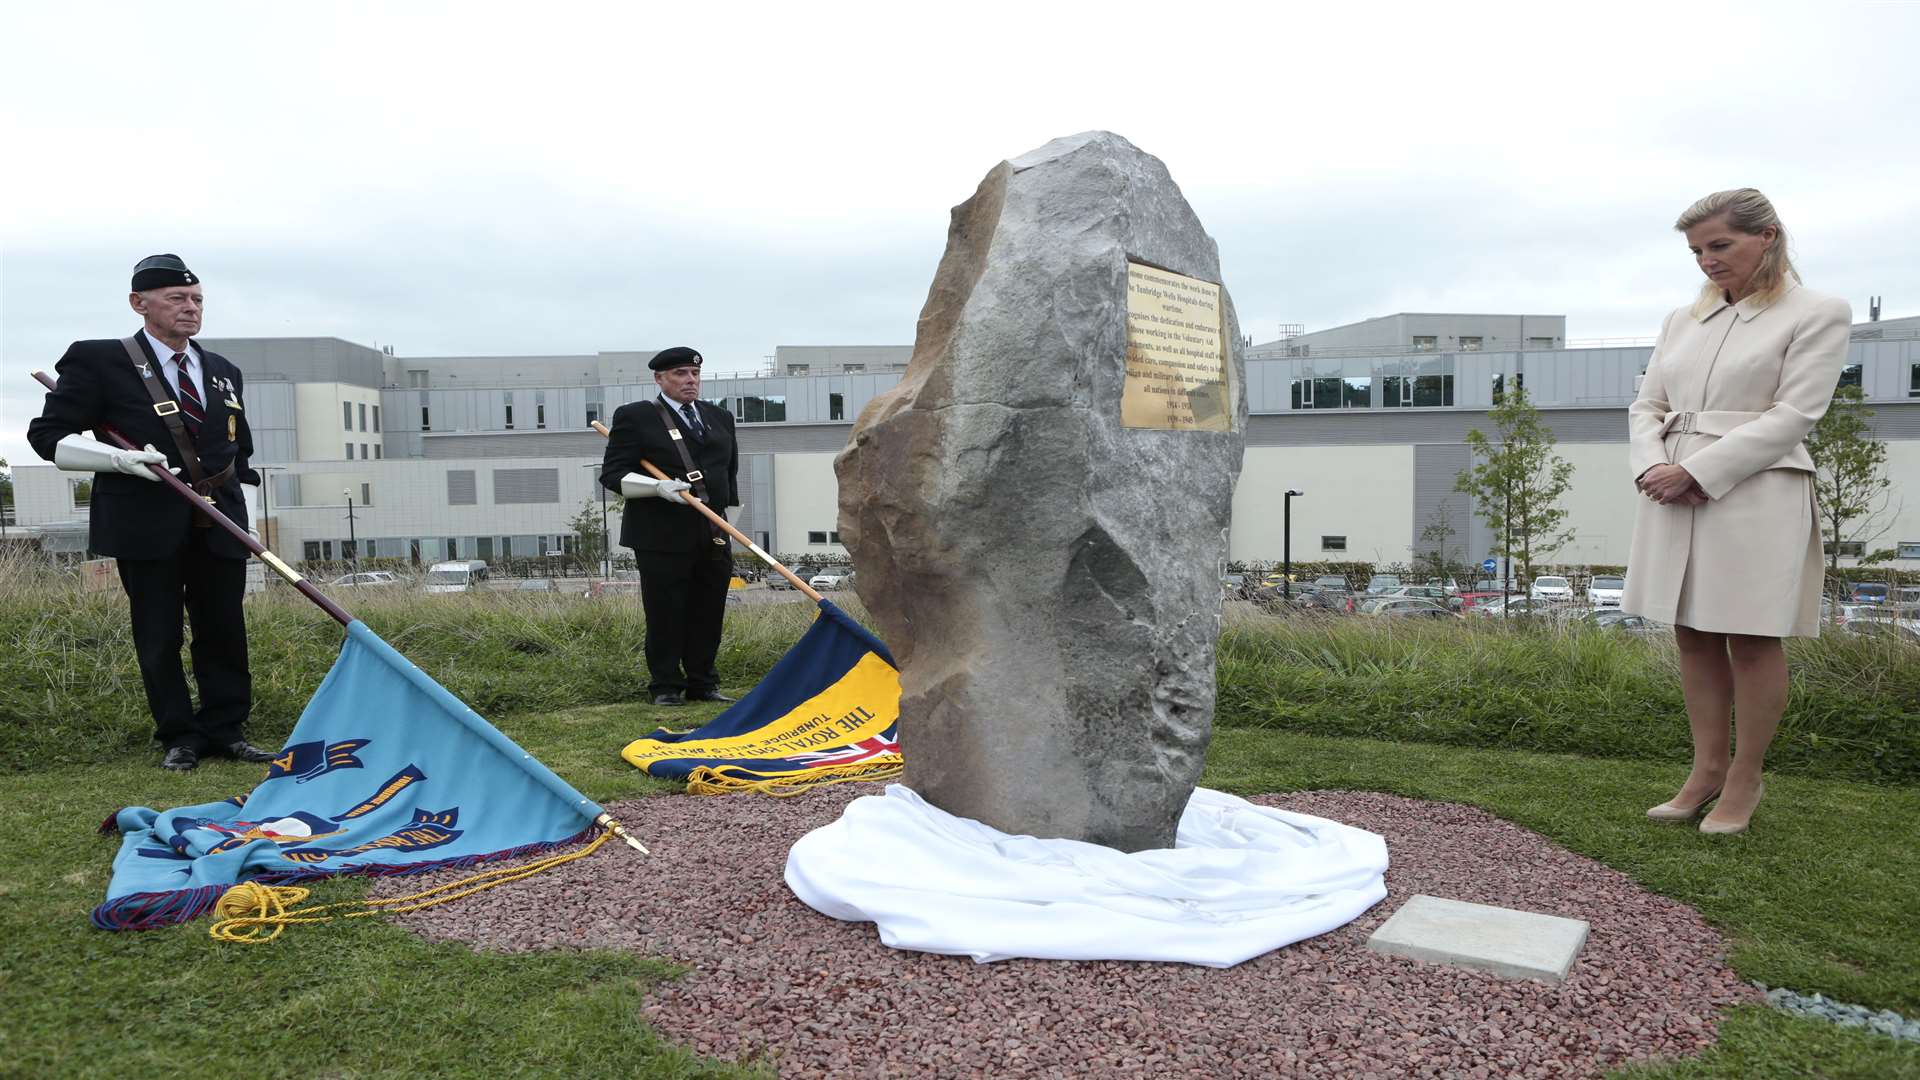 The Countess unveiled the commemorative stone in front of members of the emergency services and hospital